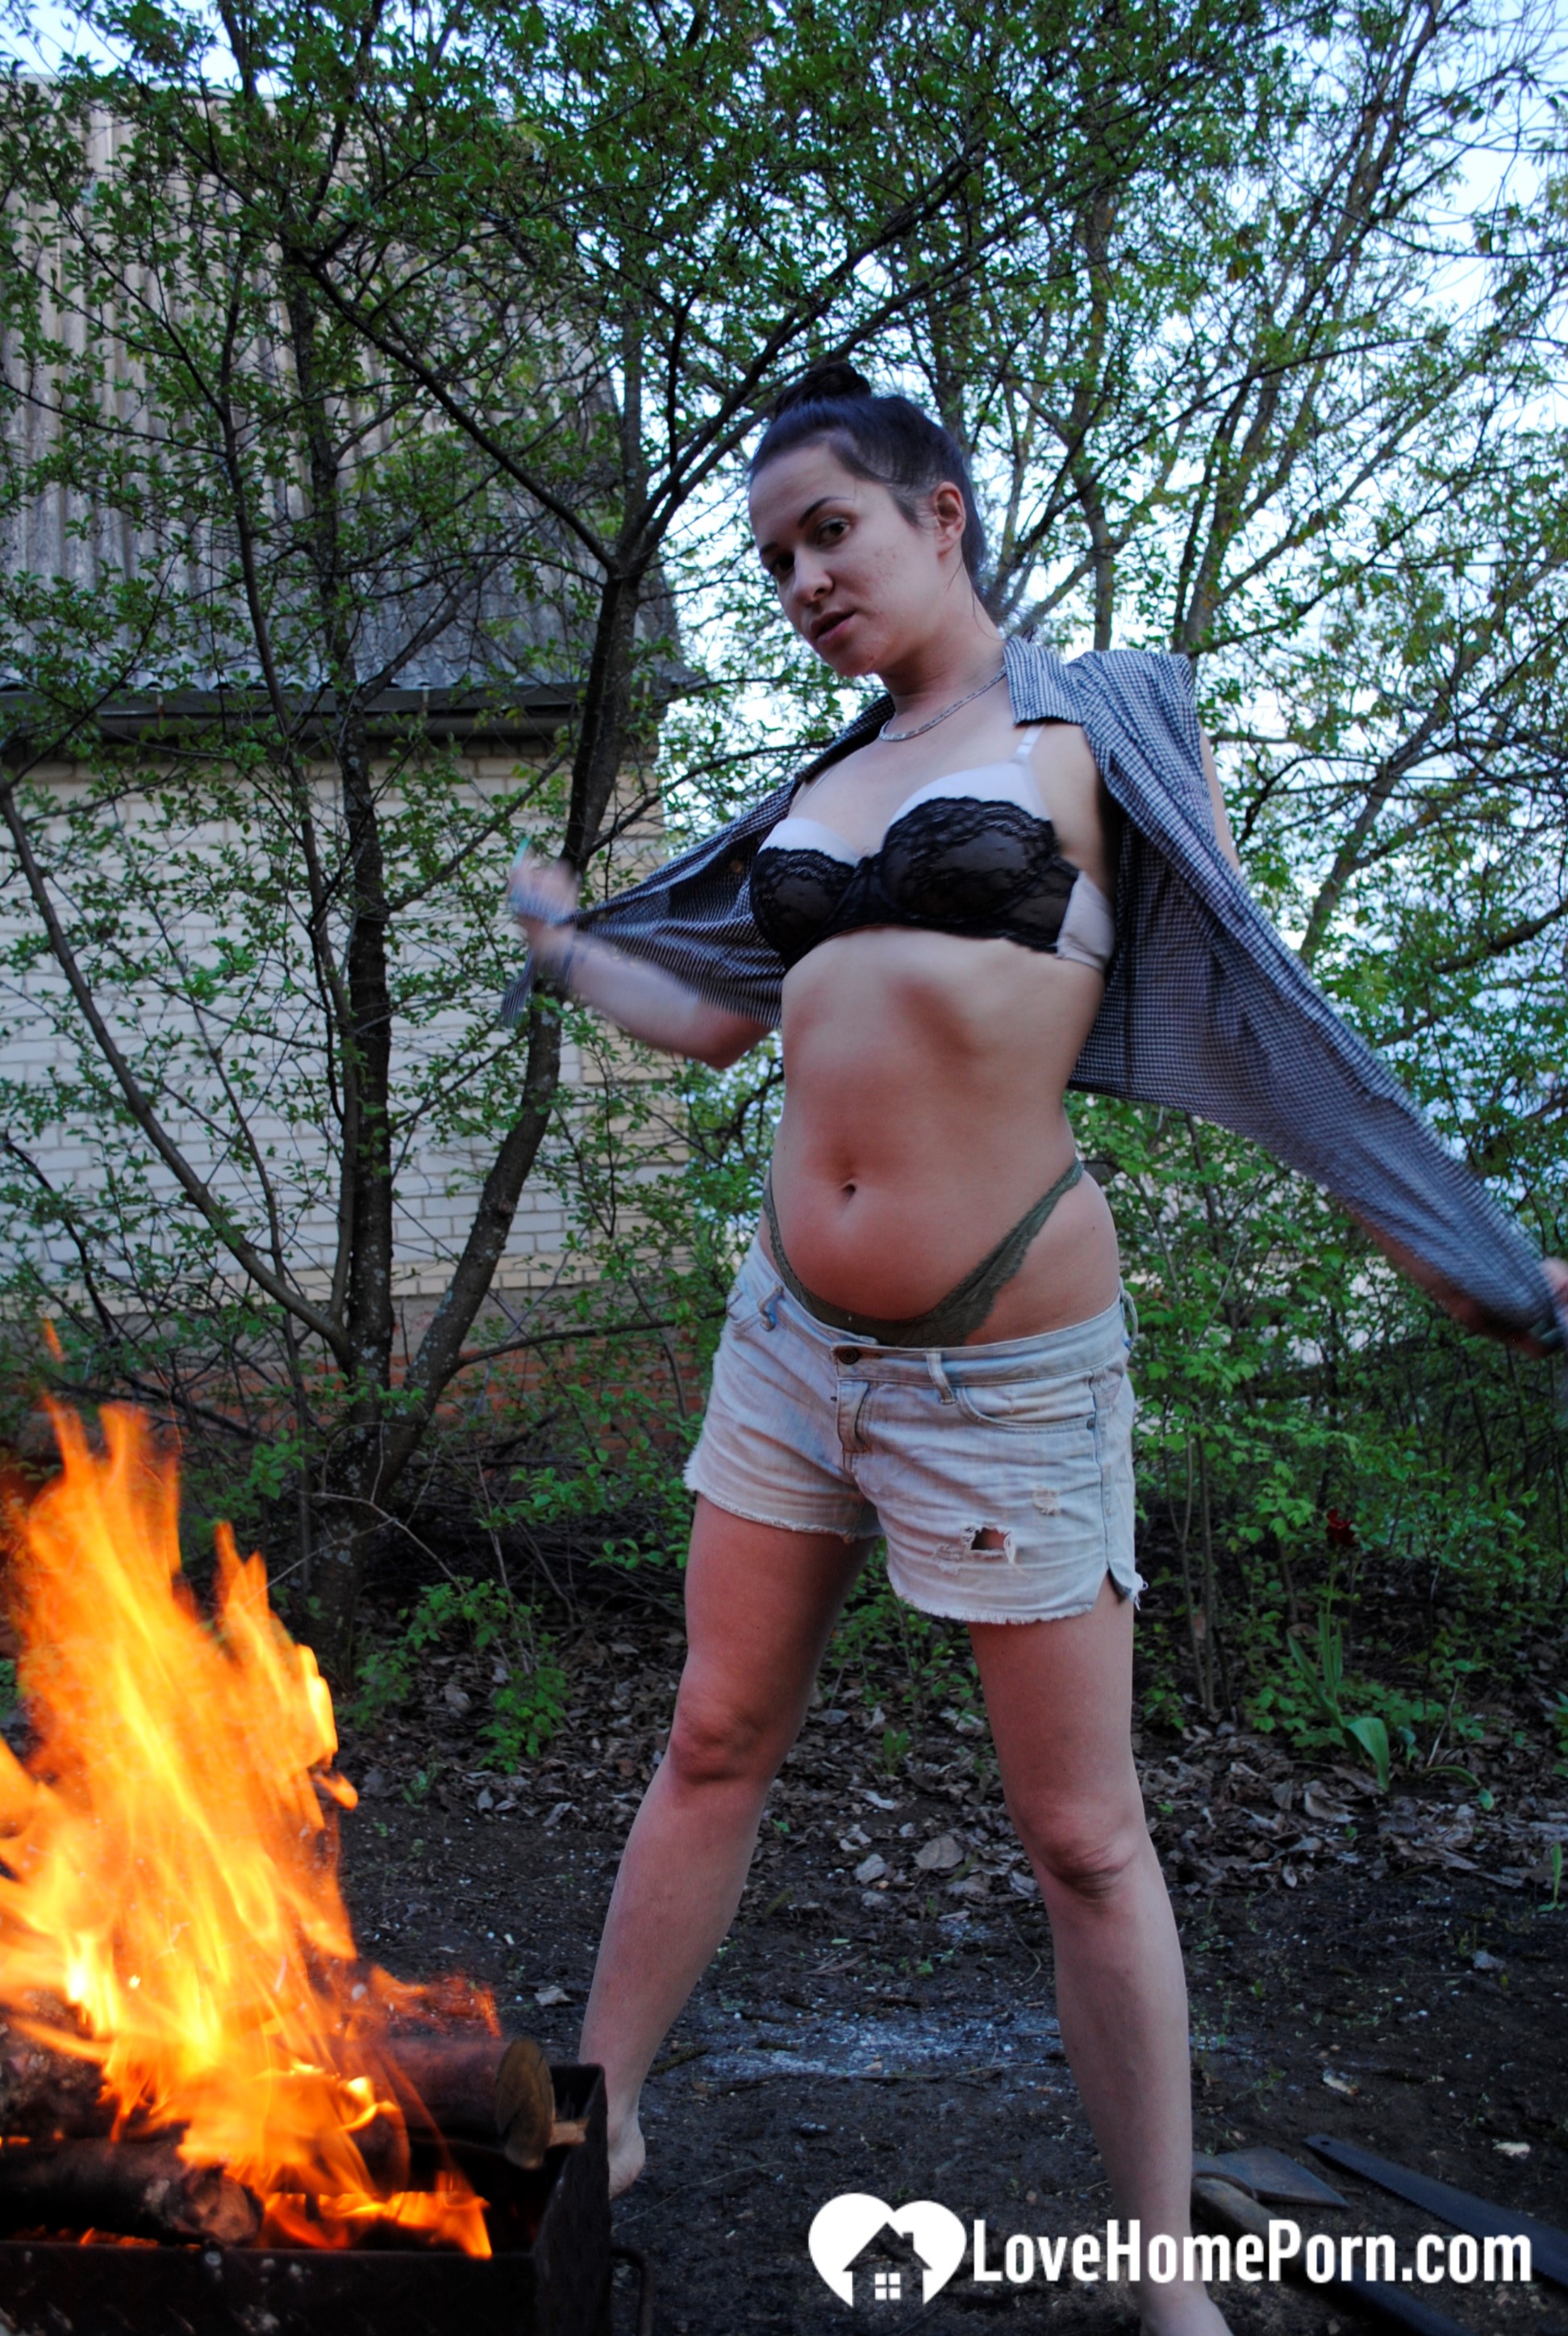 Barbecuing makes her hot so she strips